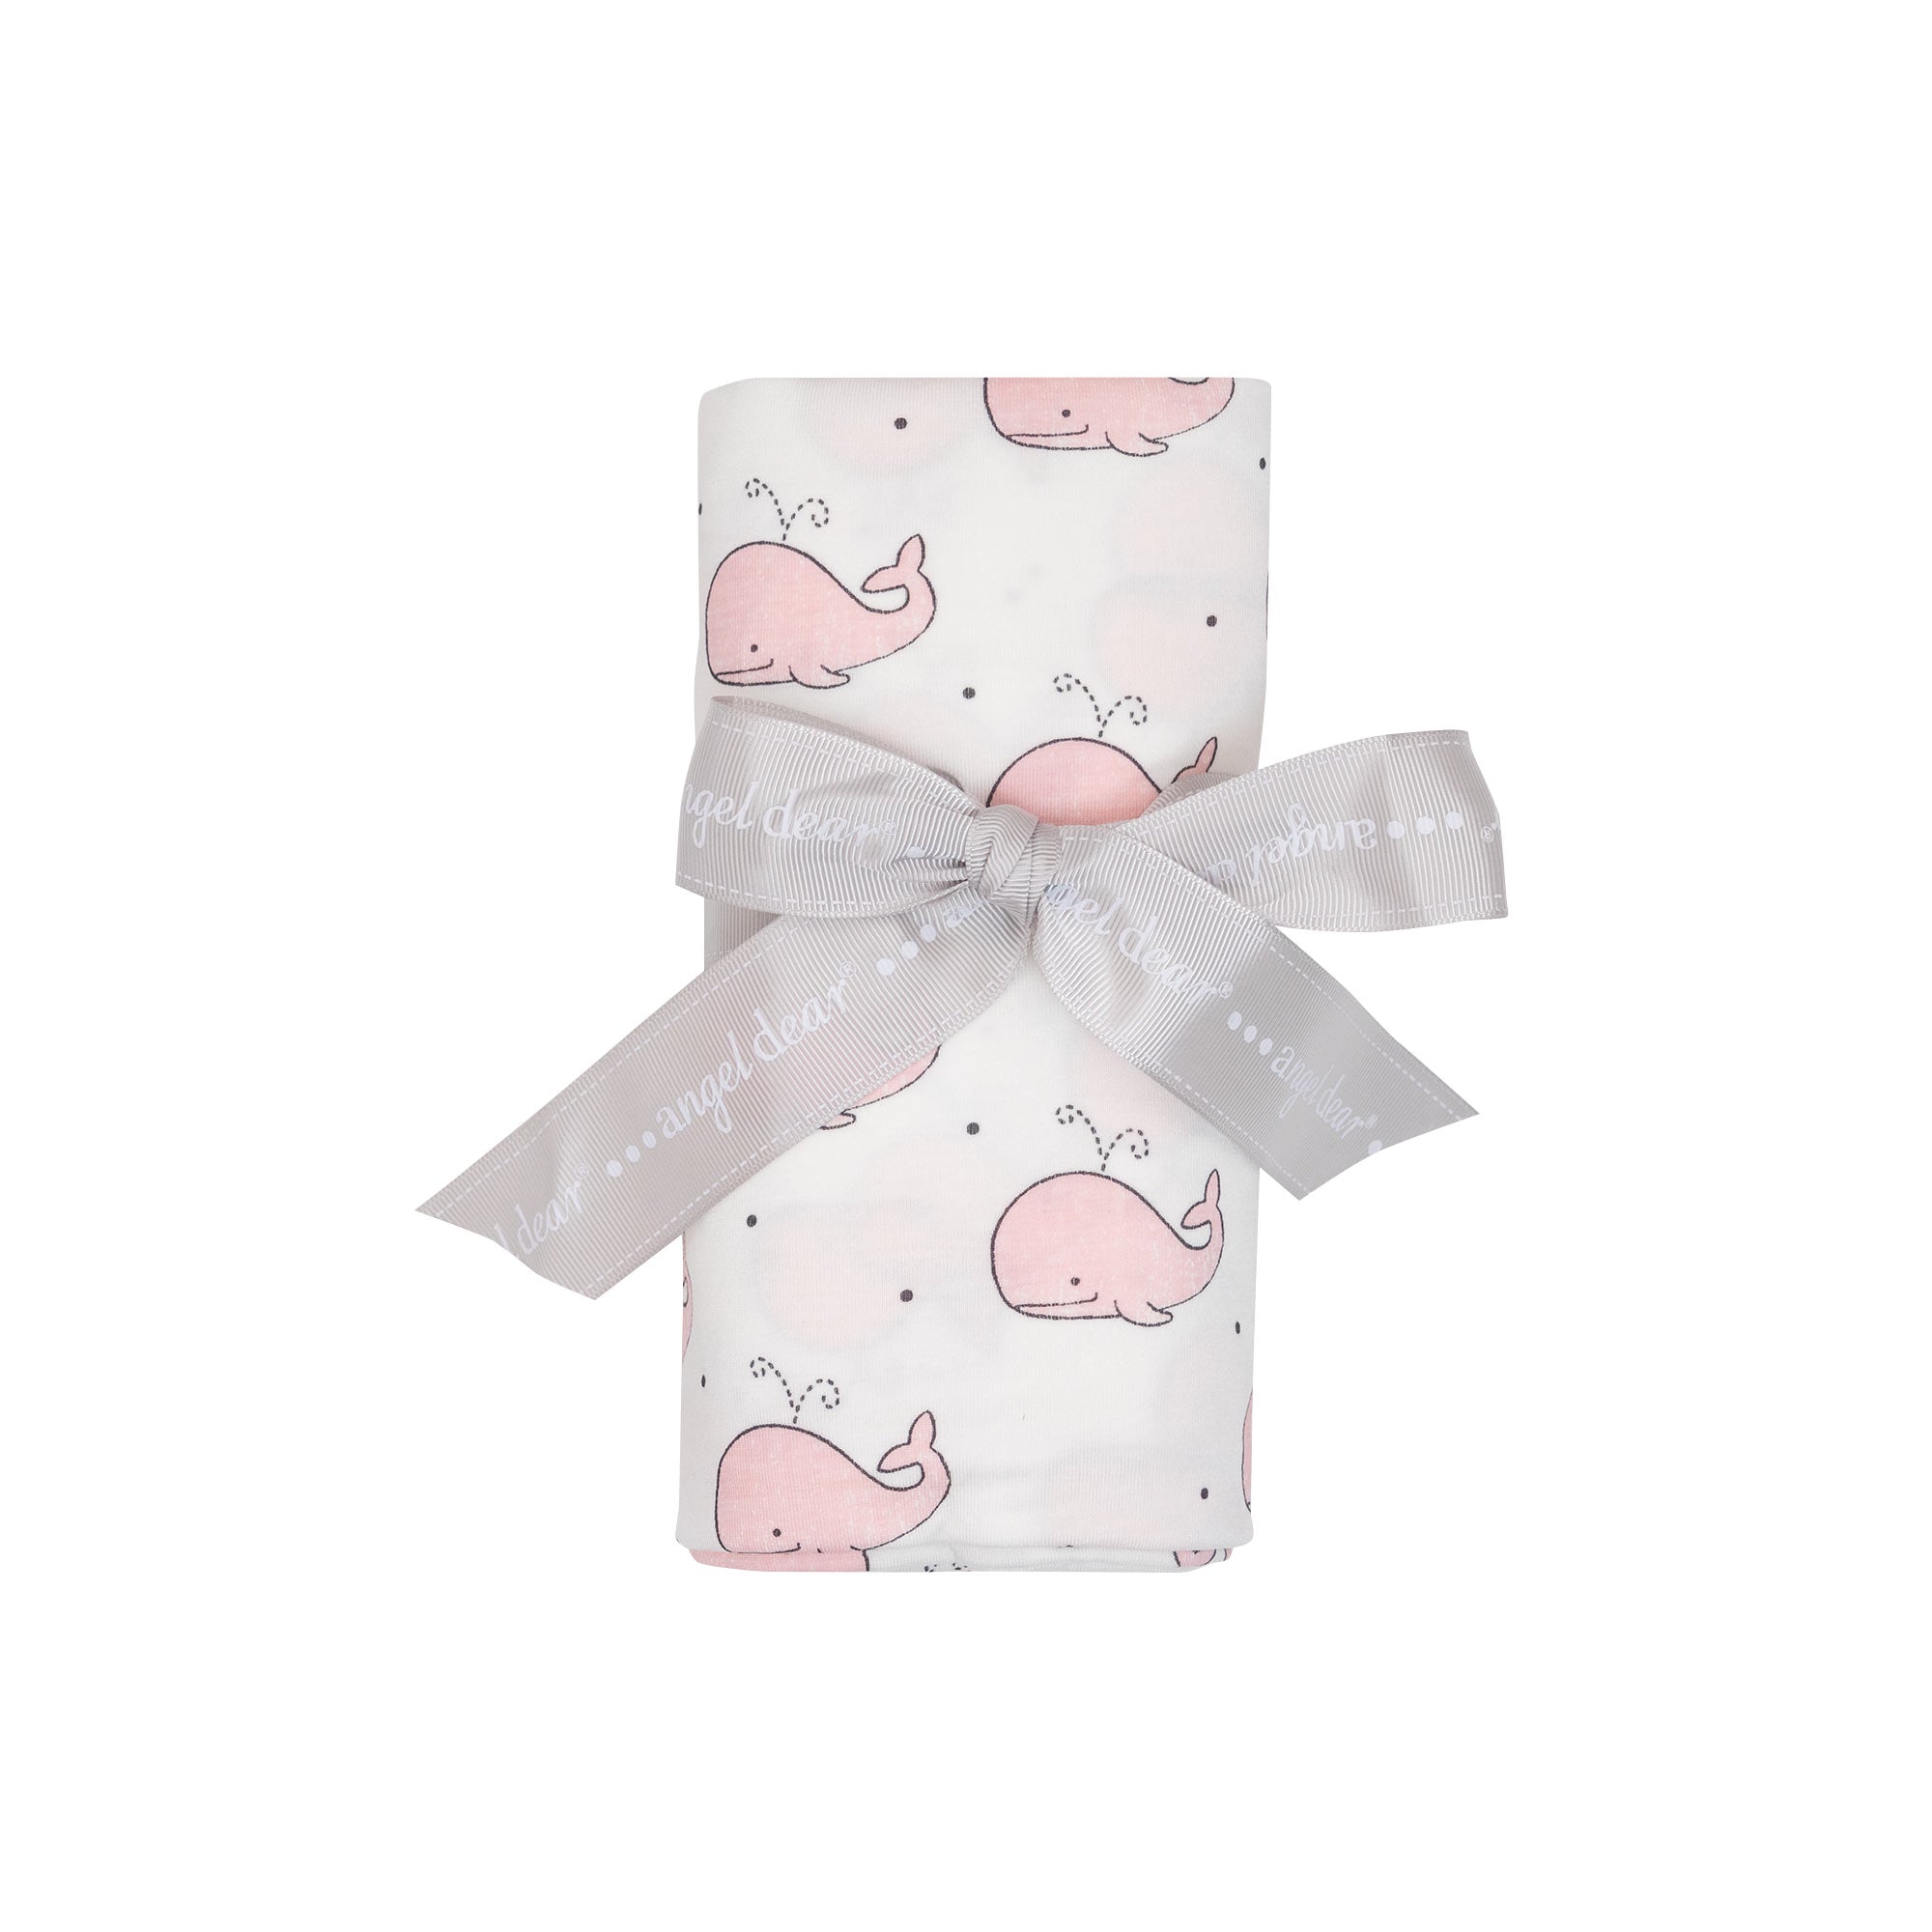 Swaddle Blanket - Bubbly Whale Pink